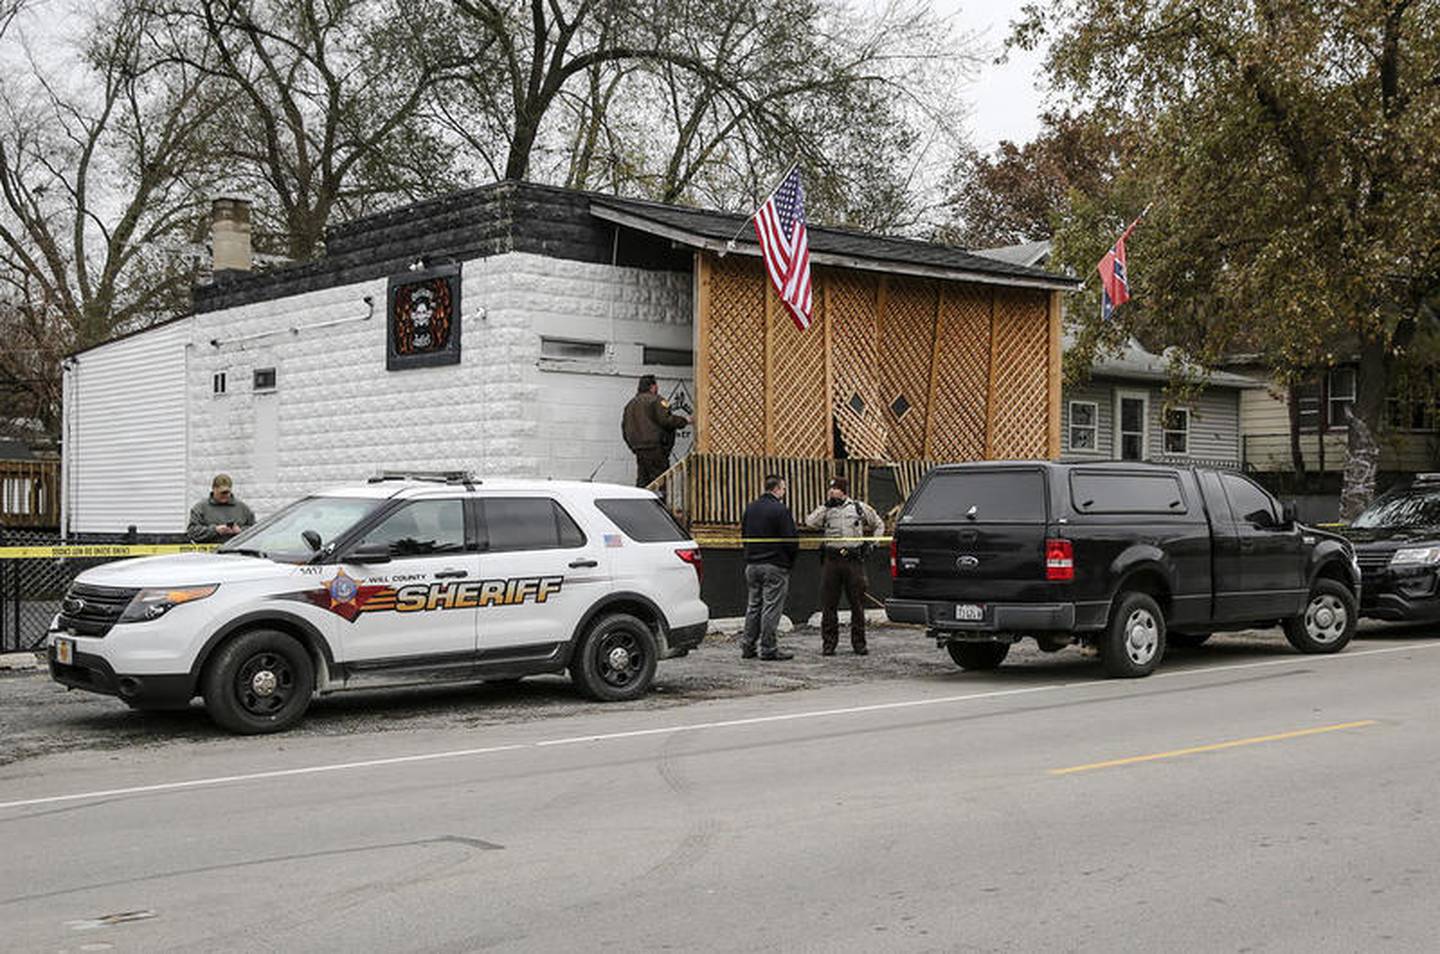 County investigators search the Outlaws' clubhouse Thursday, Nov. 16, 2017, after Kaitlyn Kearns, a 24-year-old bartender from Joliet, was founded dead from a gunshot in a rural area of Kankakee County, according to a sheriff’s office news release Ill.